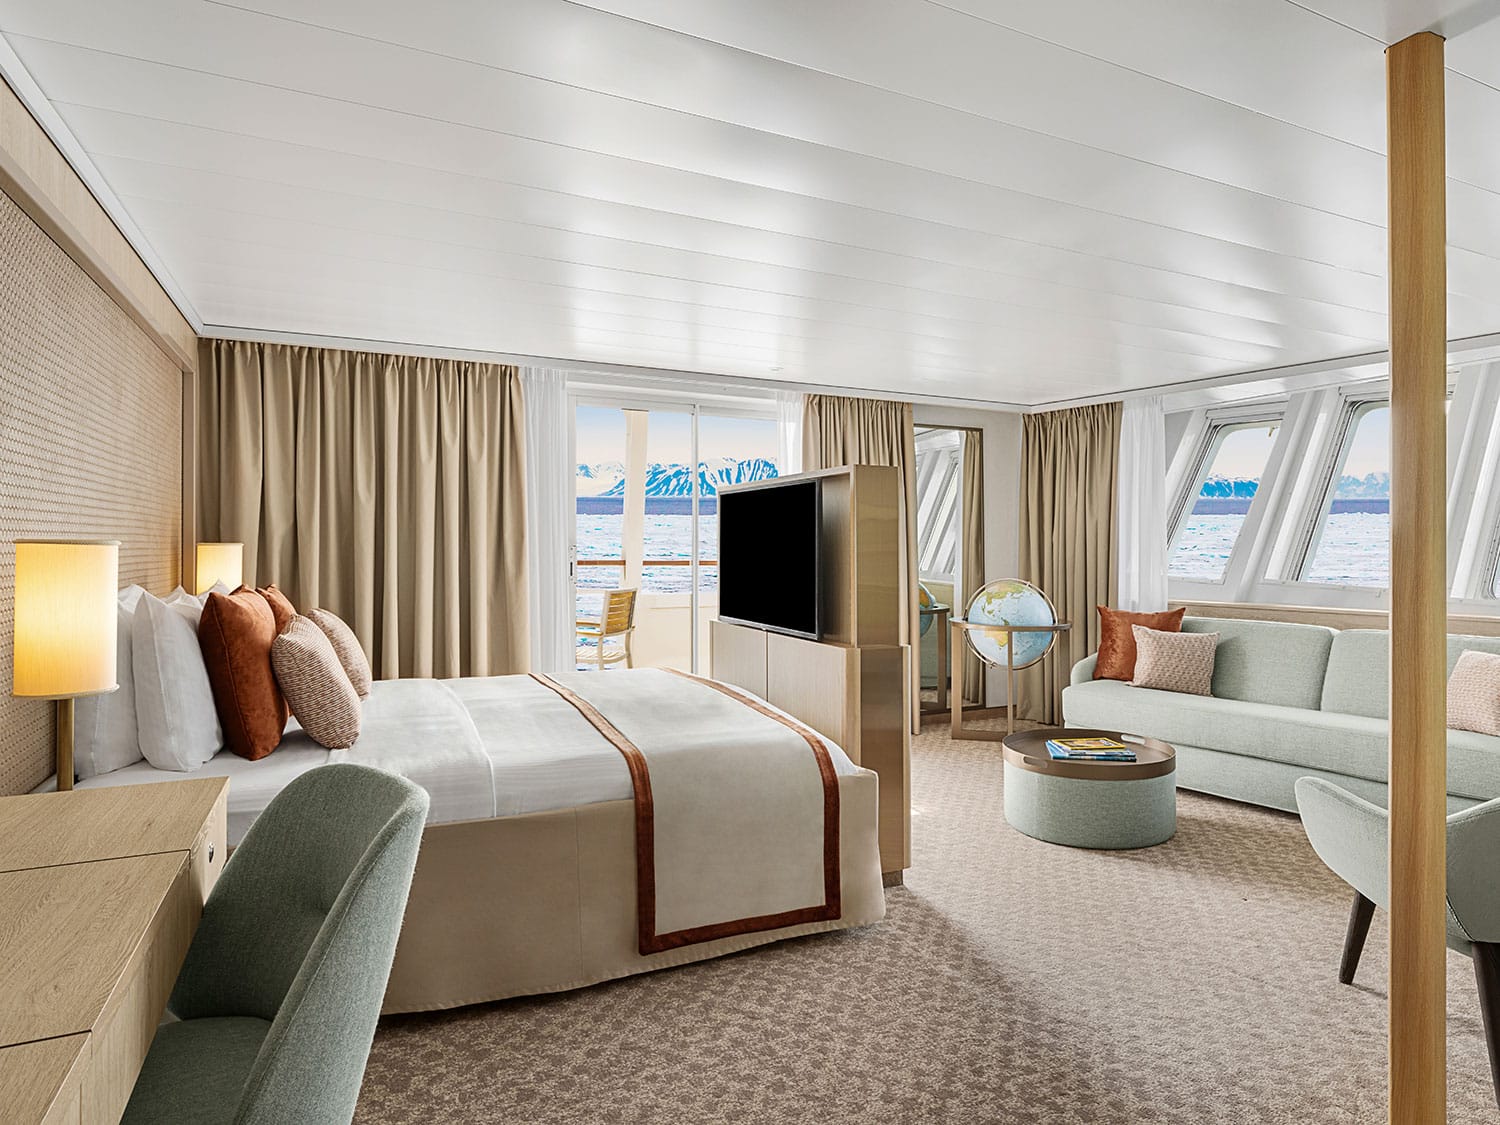 A cabin on the National Geographic Explorer cruise ship